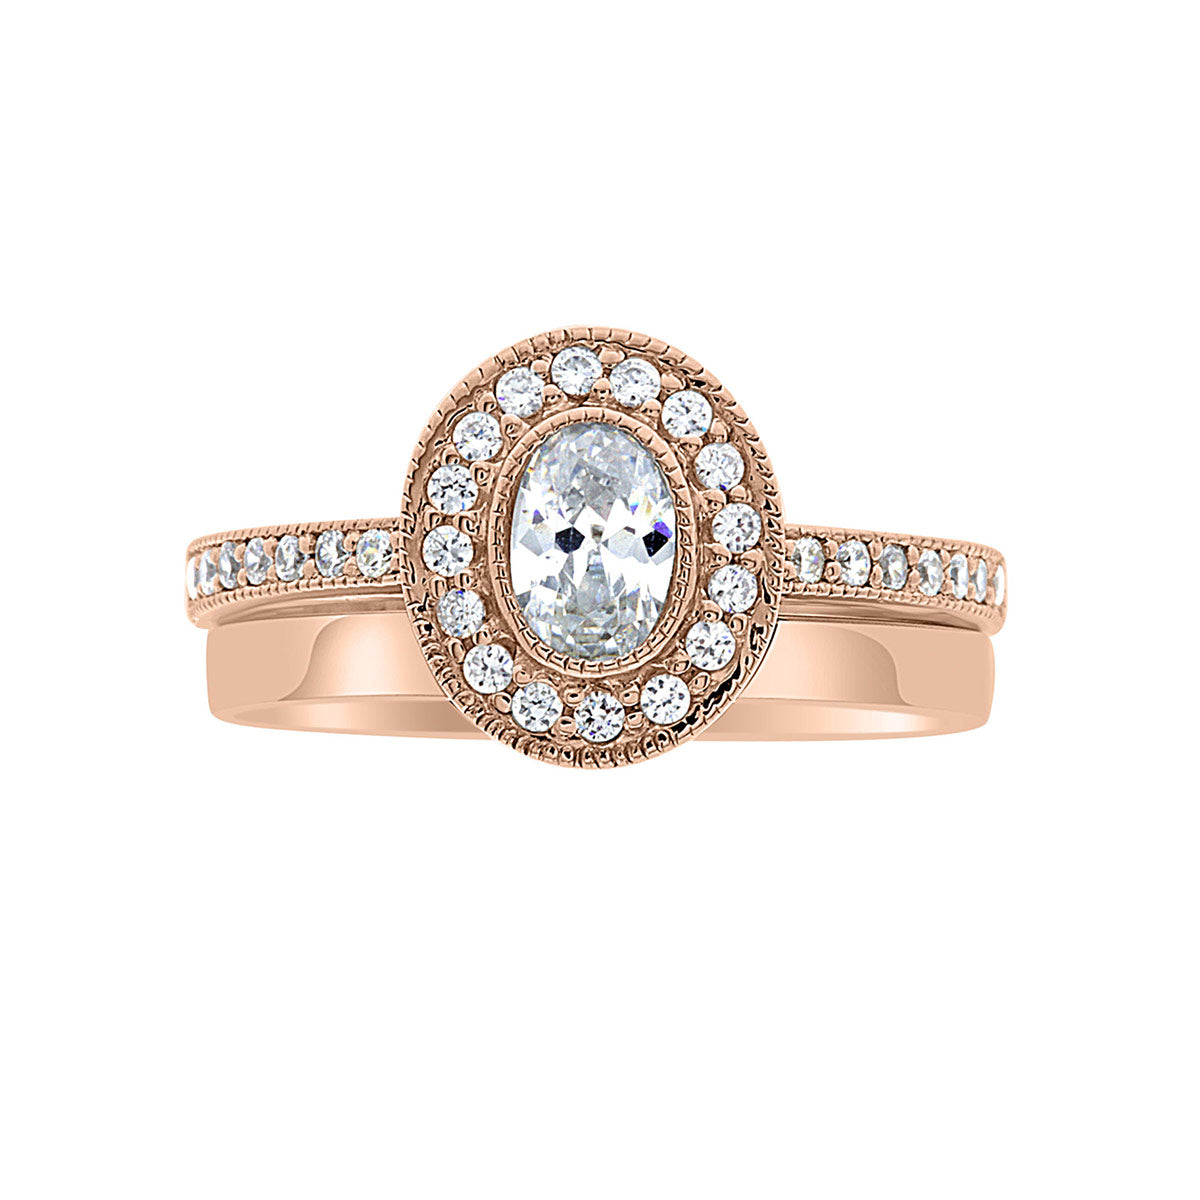 Milgrain Detail Engagement Ring with a matching wedding rose gold band